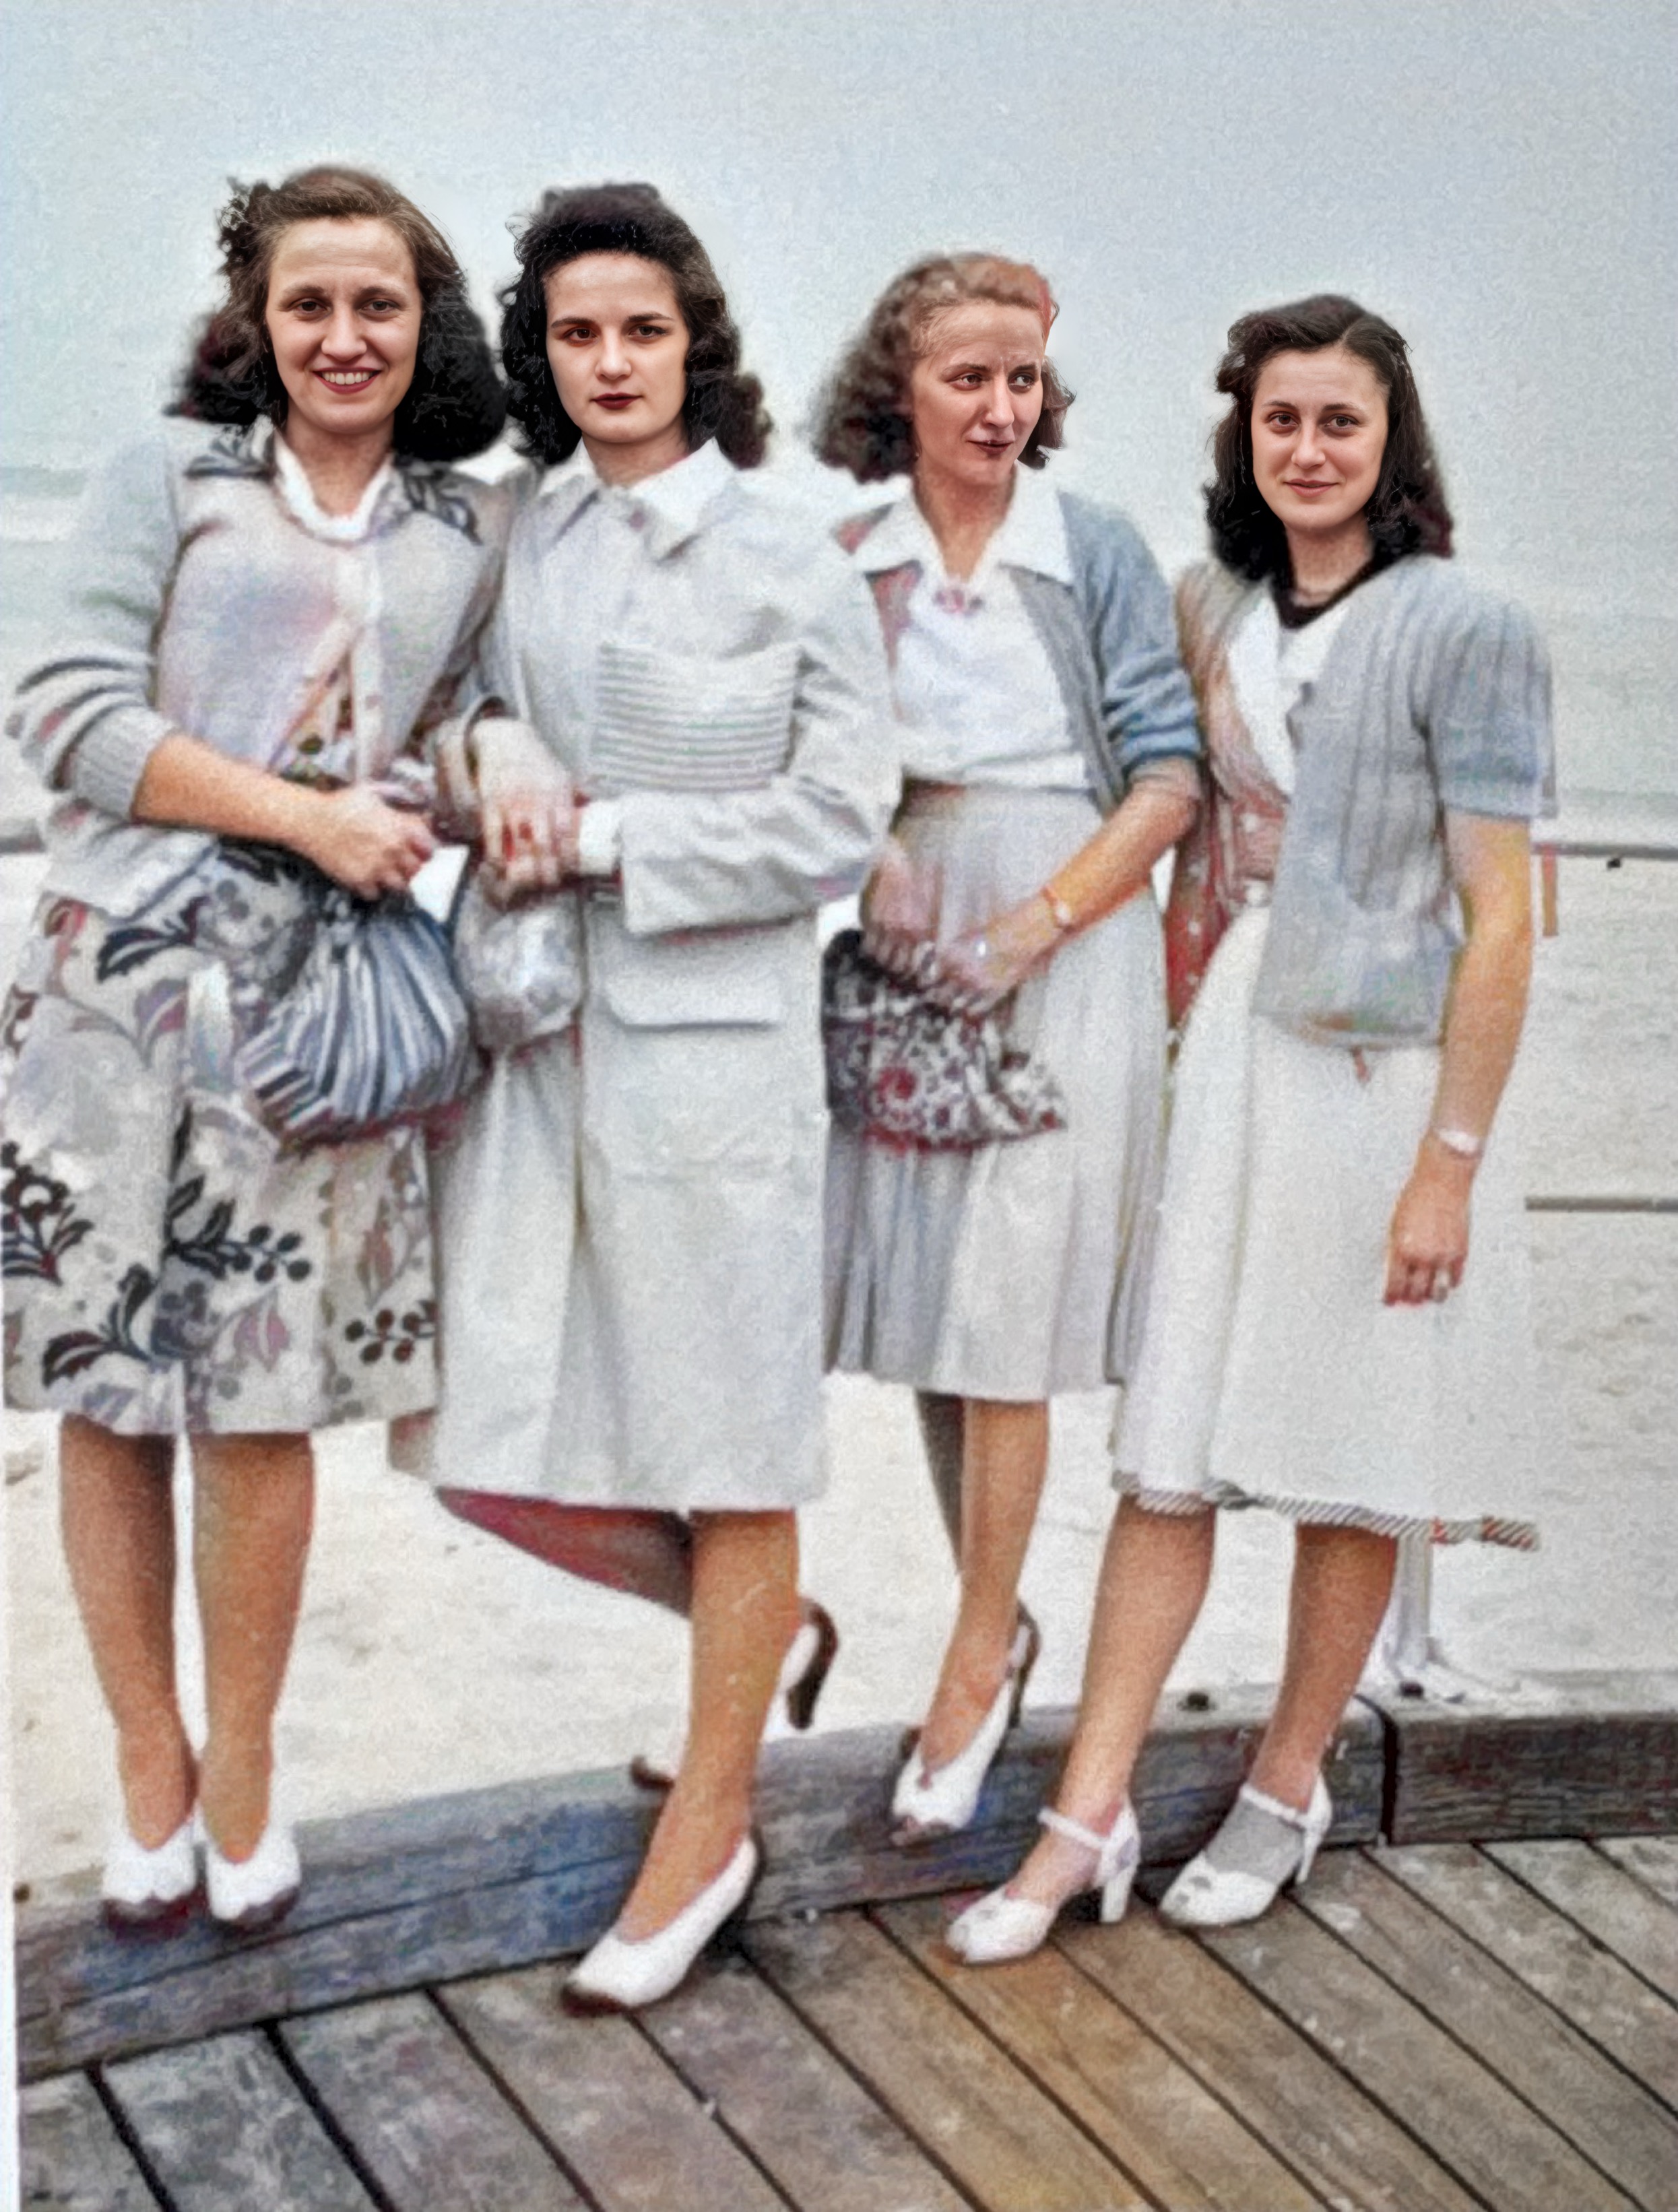 Mom, her best friend Marge Kozma and 2 unknown girlfriends FOTO PROCESSED: 1945.10.08